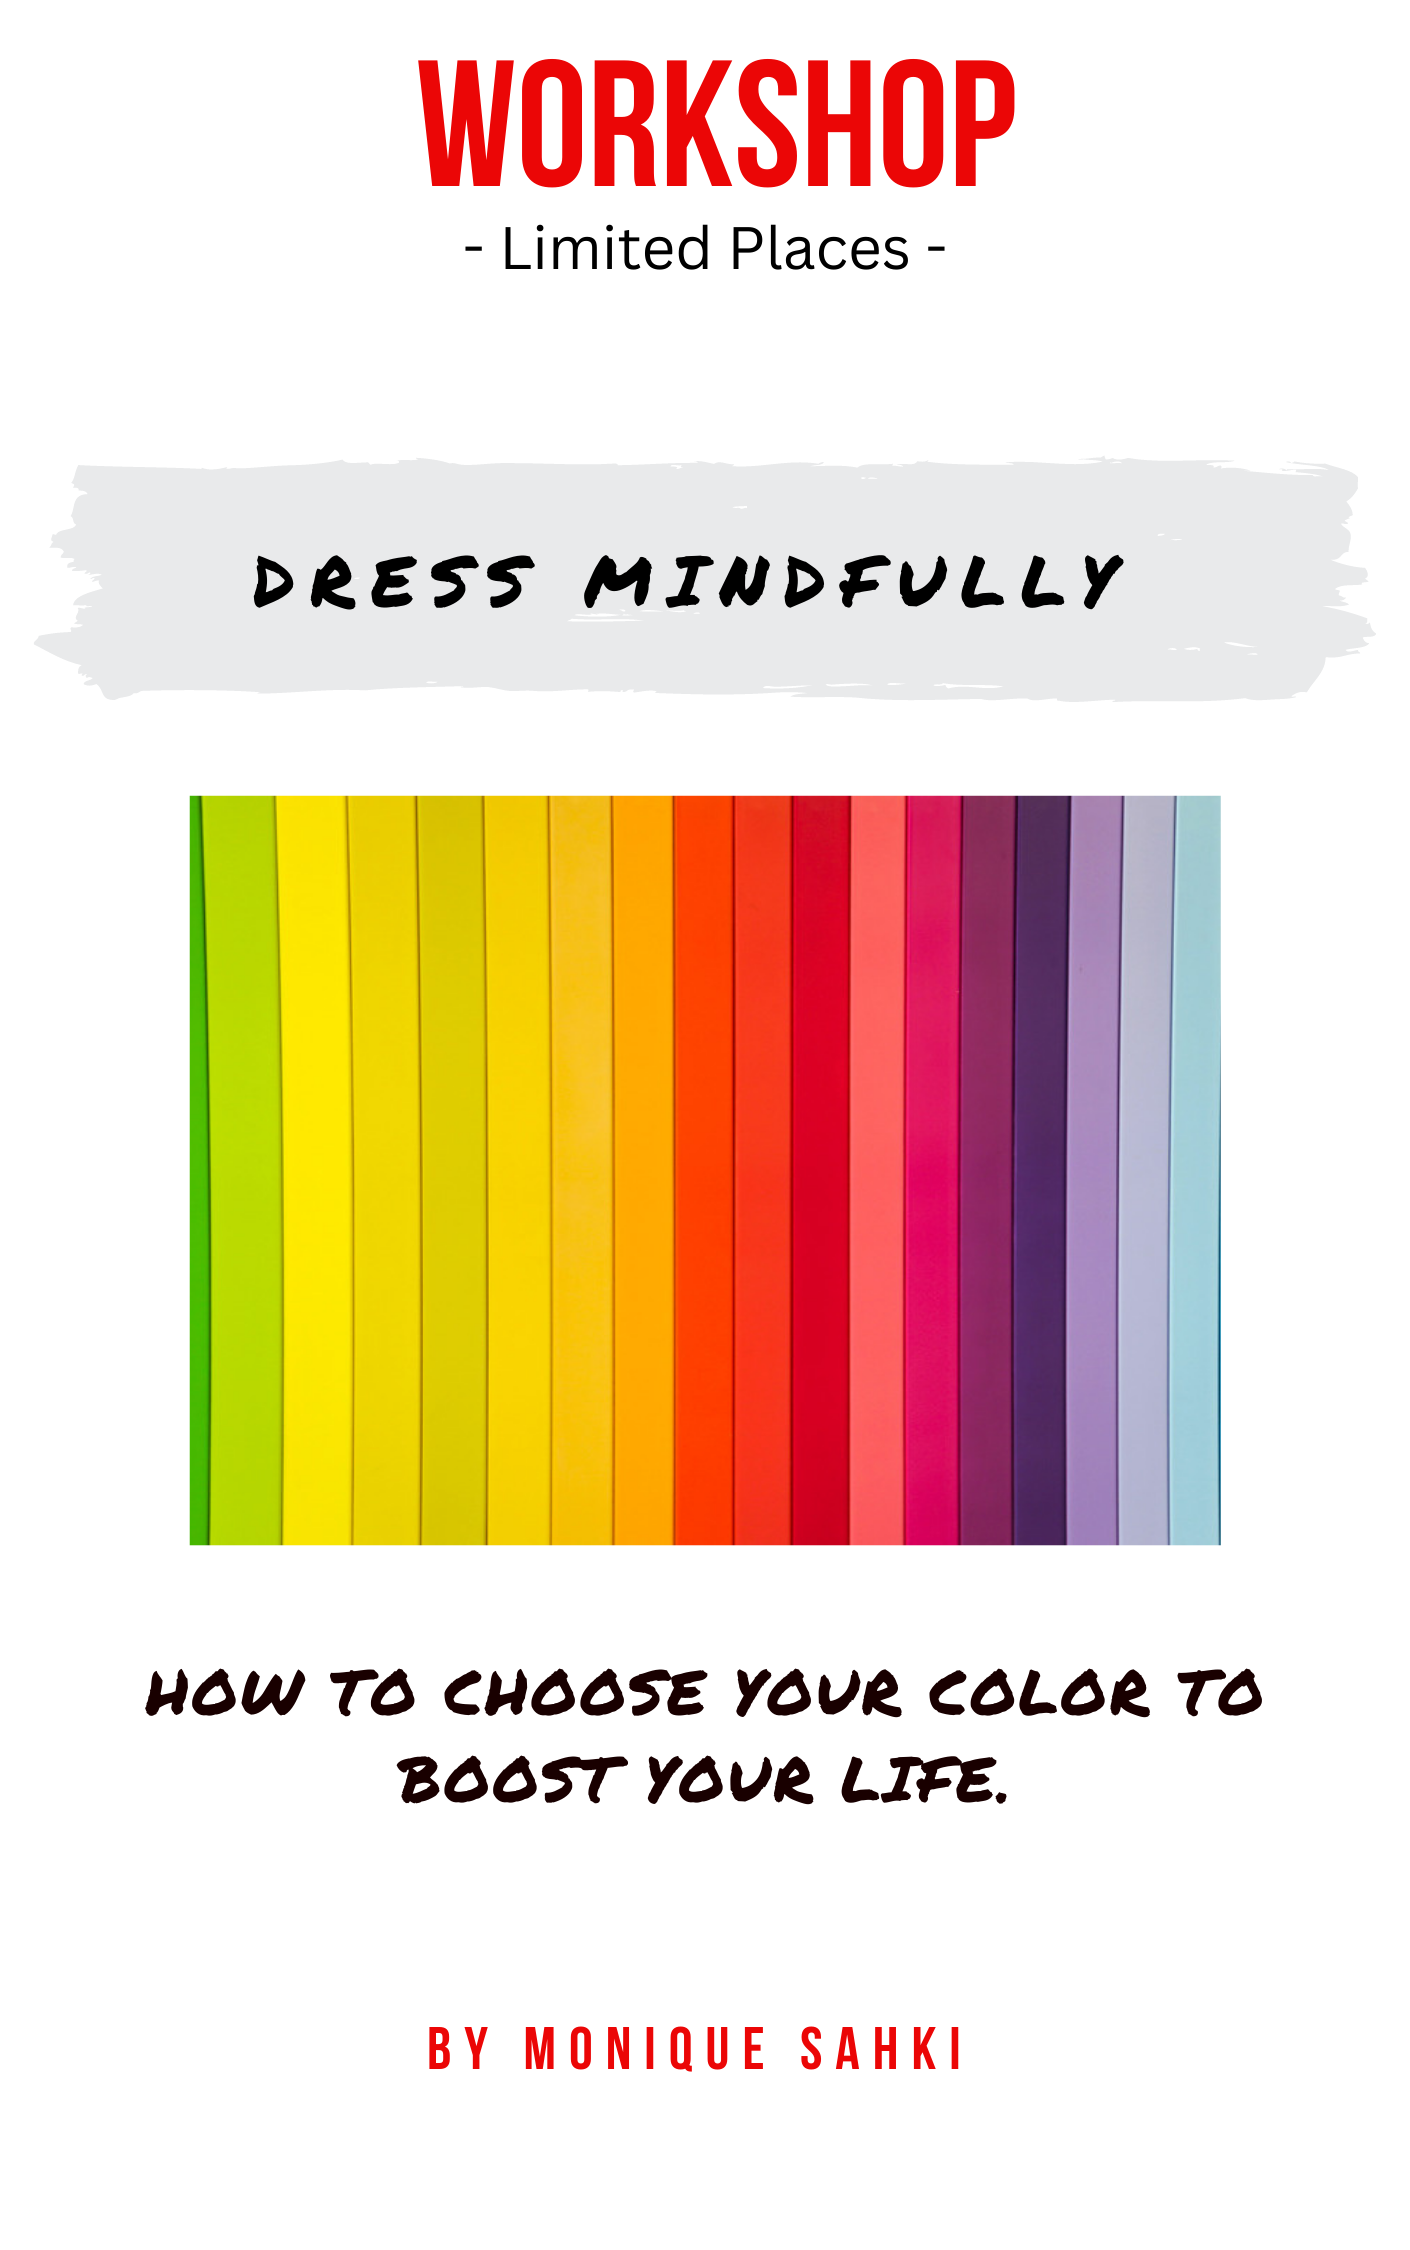 image dress mindfully with color.png